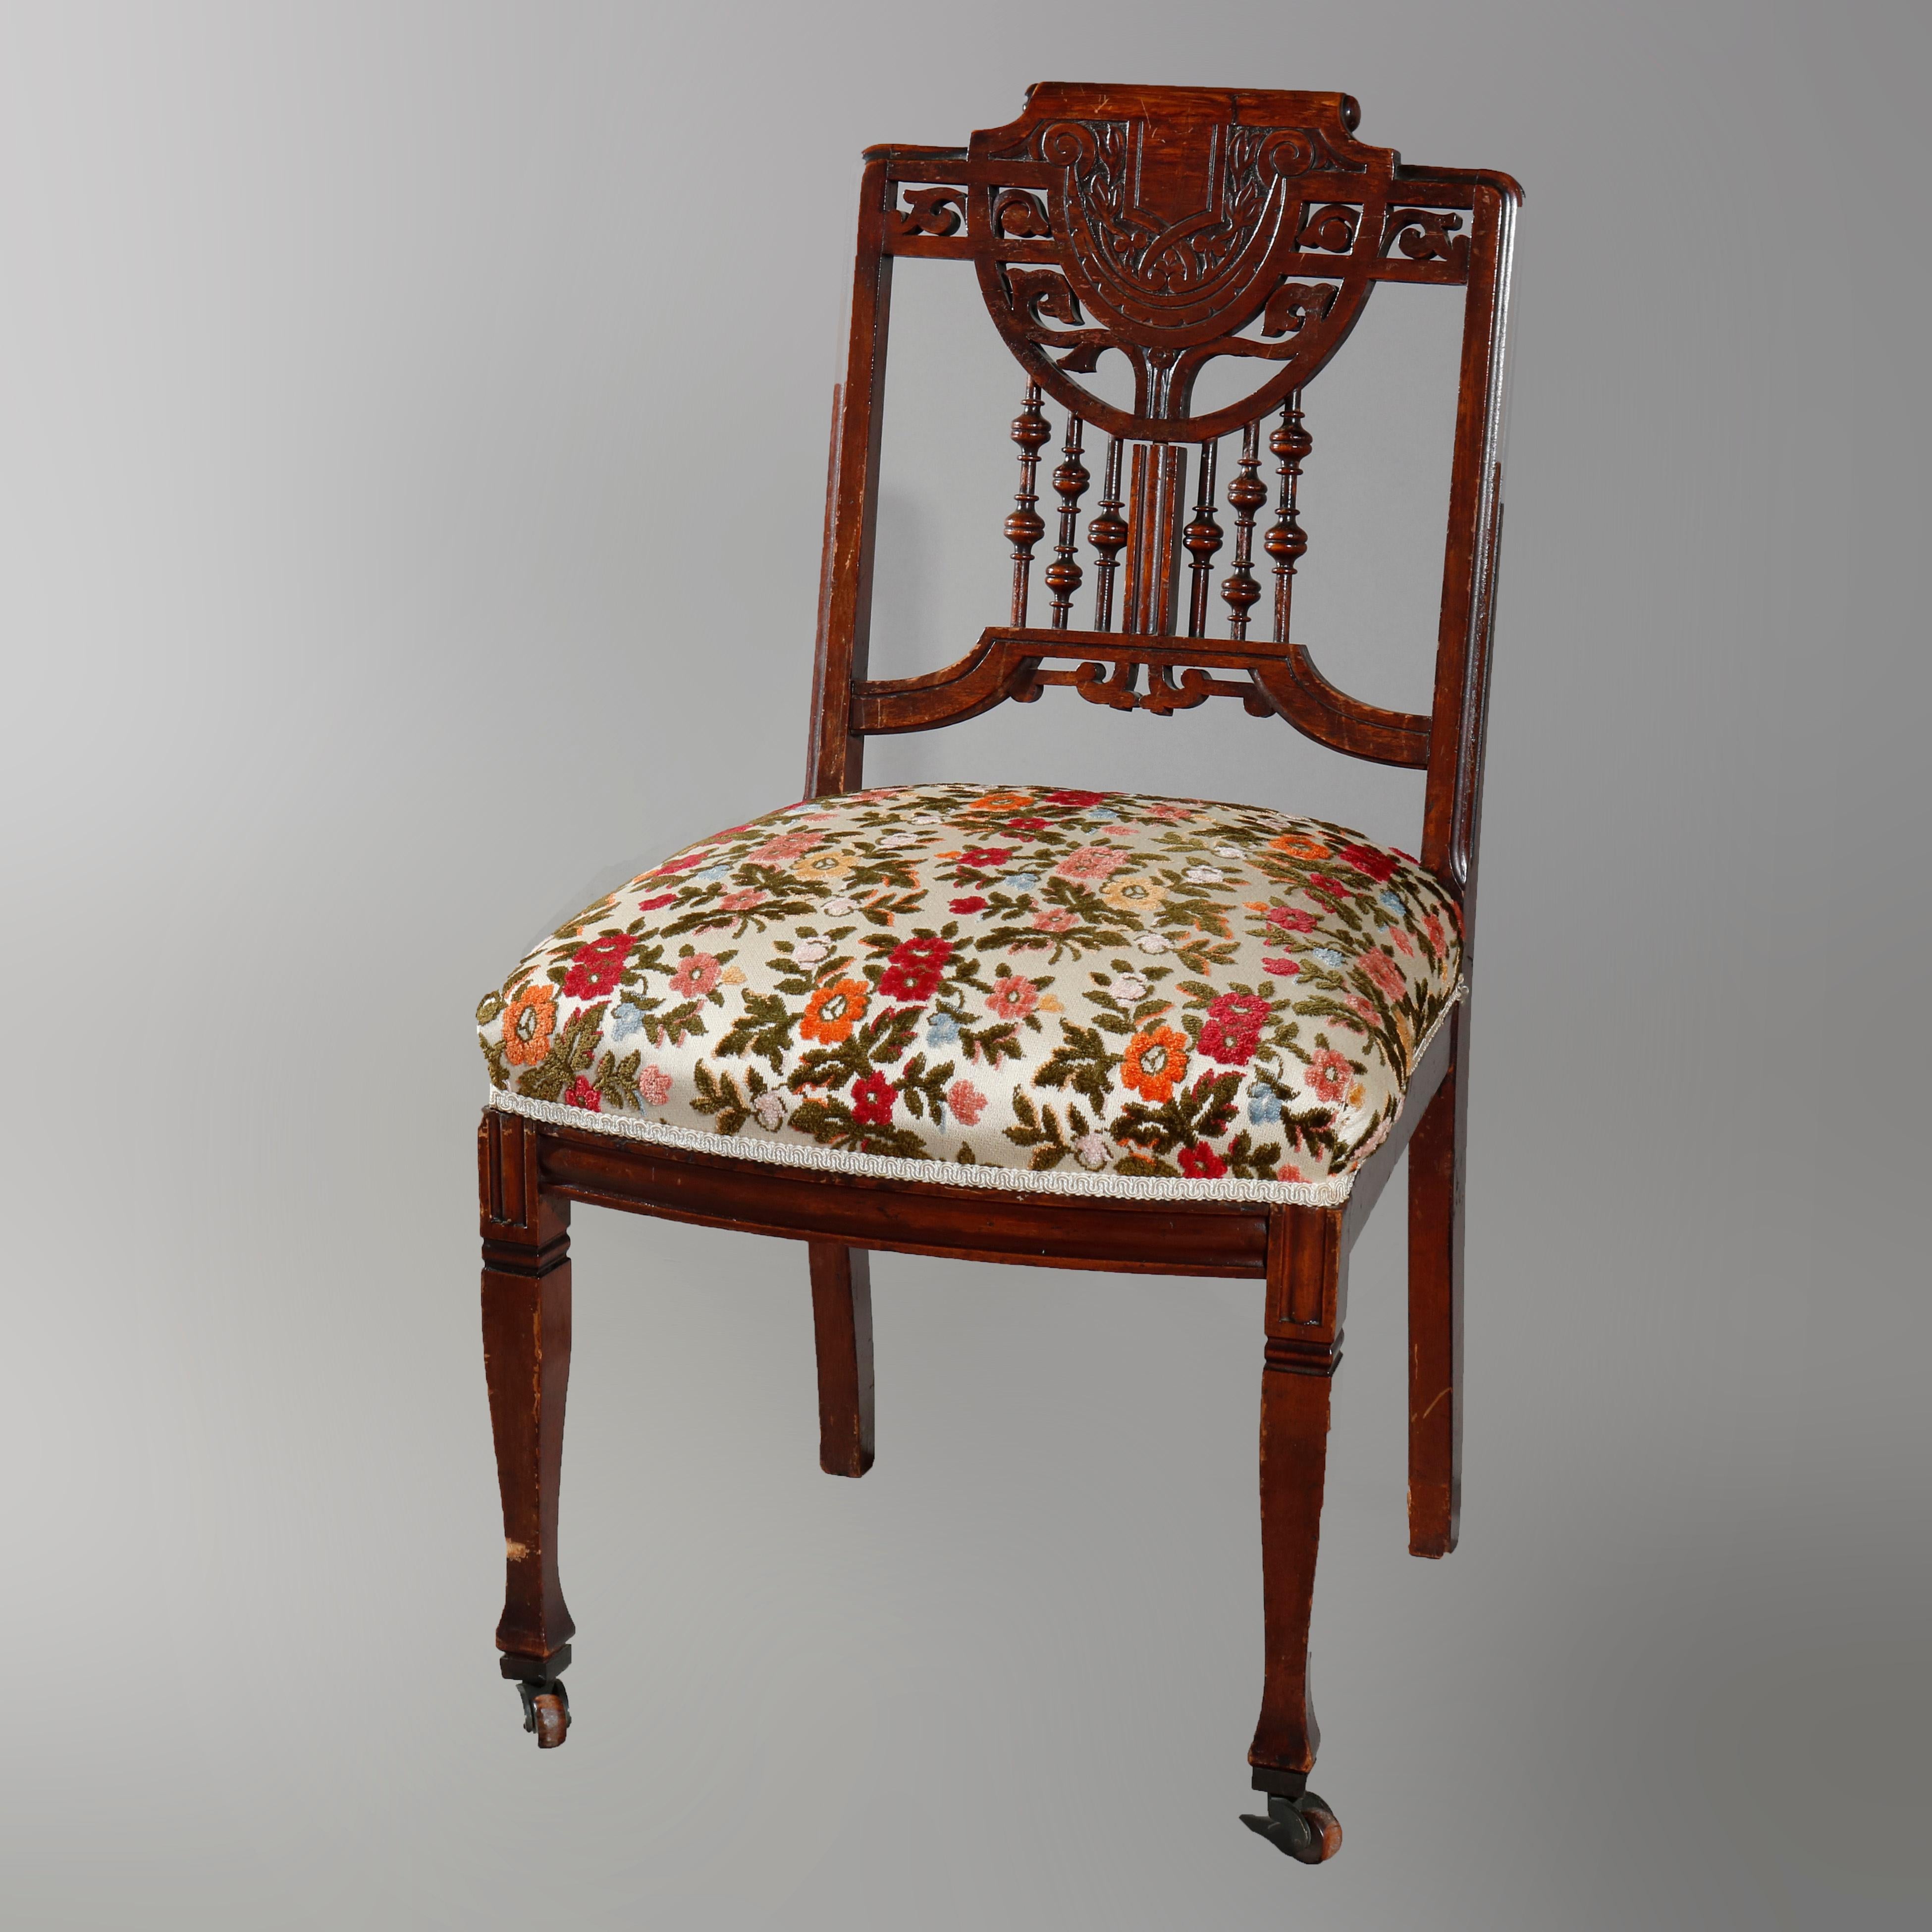 An antique Eastlake parlor set offers mahogany stick and ball frame with chair crest having embossed central shield with flanking scroll and foliate elements, matching settee with pierced cutout scroll frame with demilune upholstered back and scroll